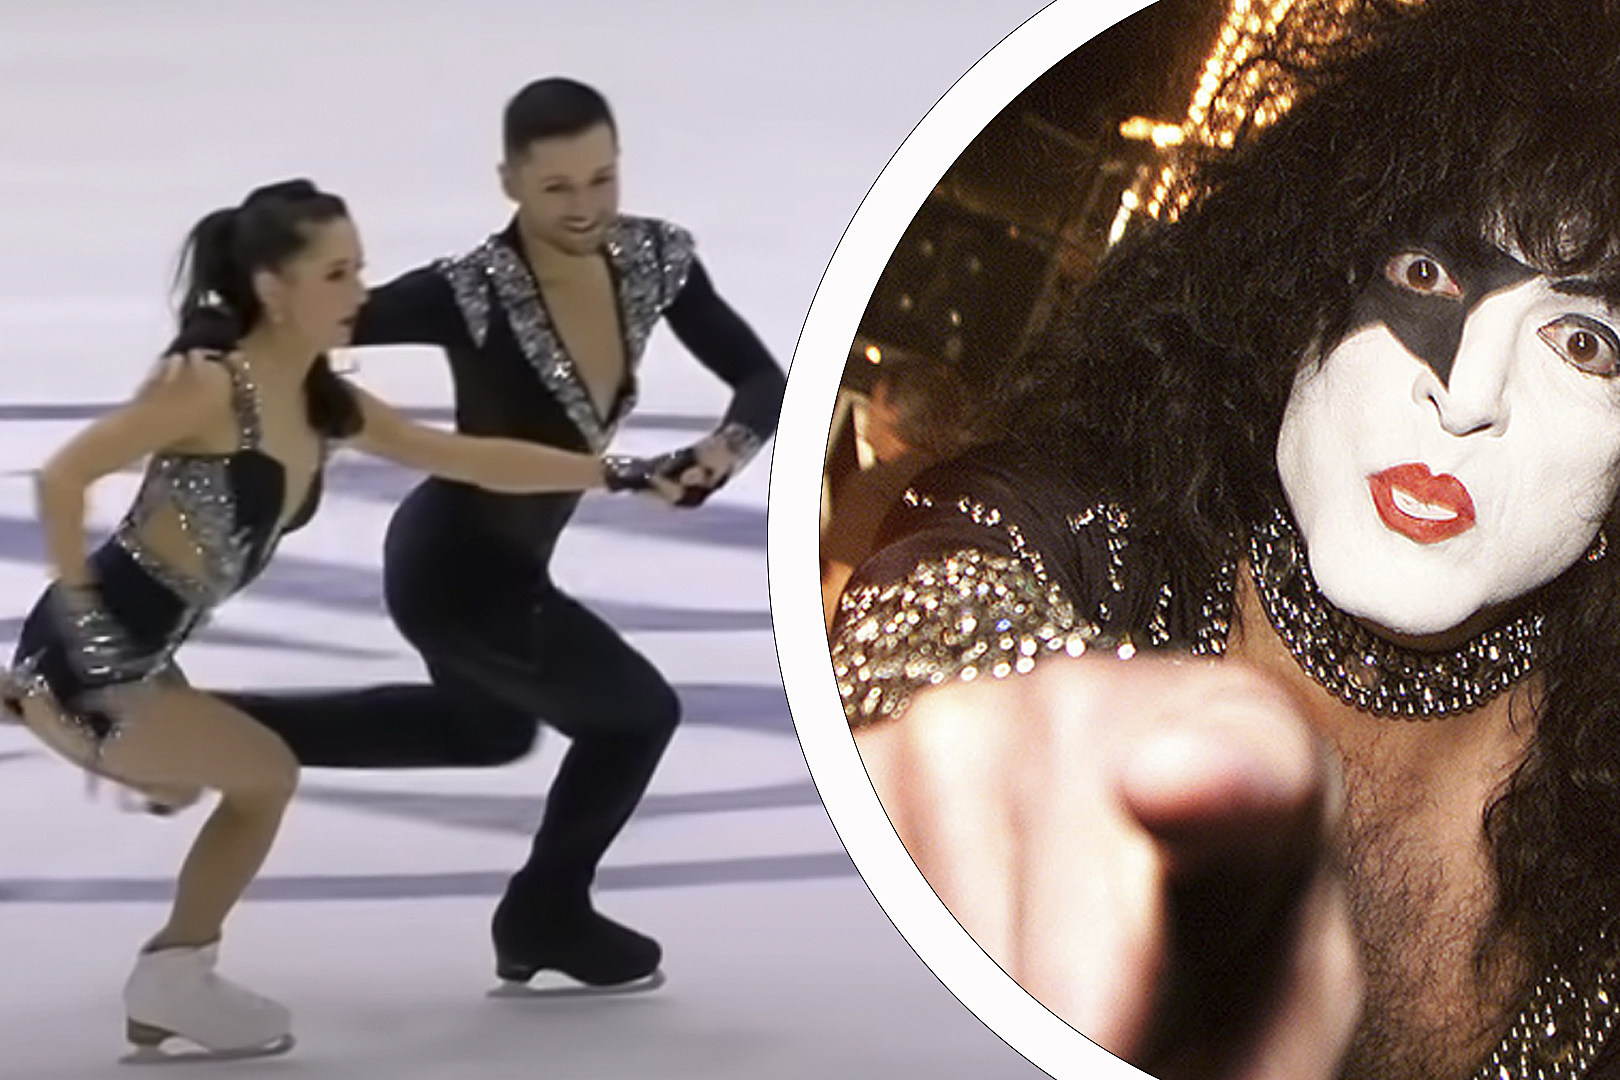 Watch Olympic Figure Skating Duo Dance to Medley of KISS Songs